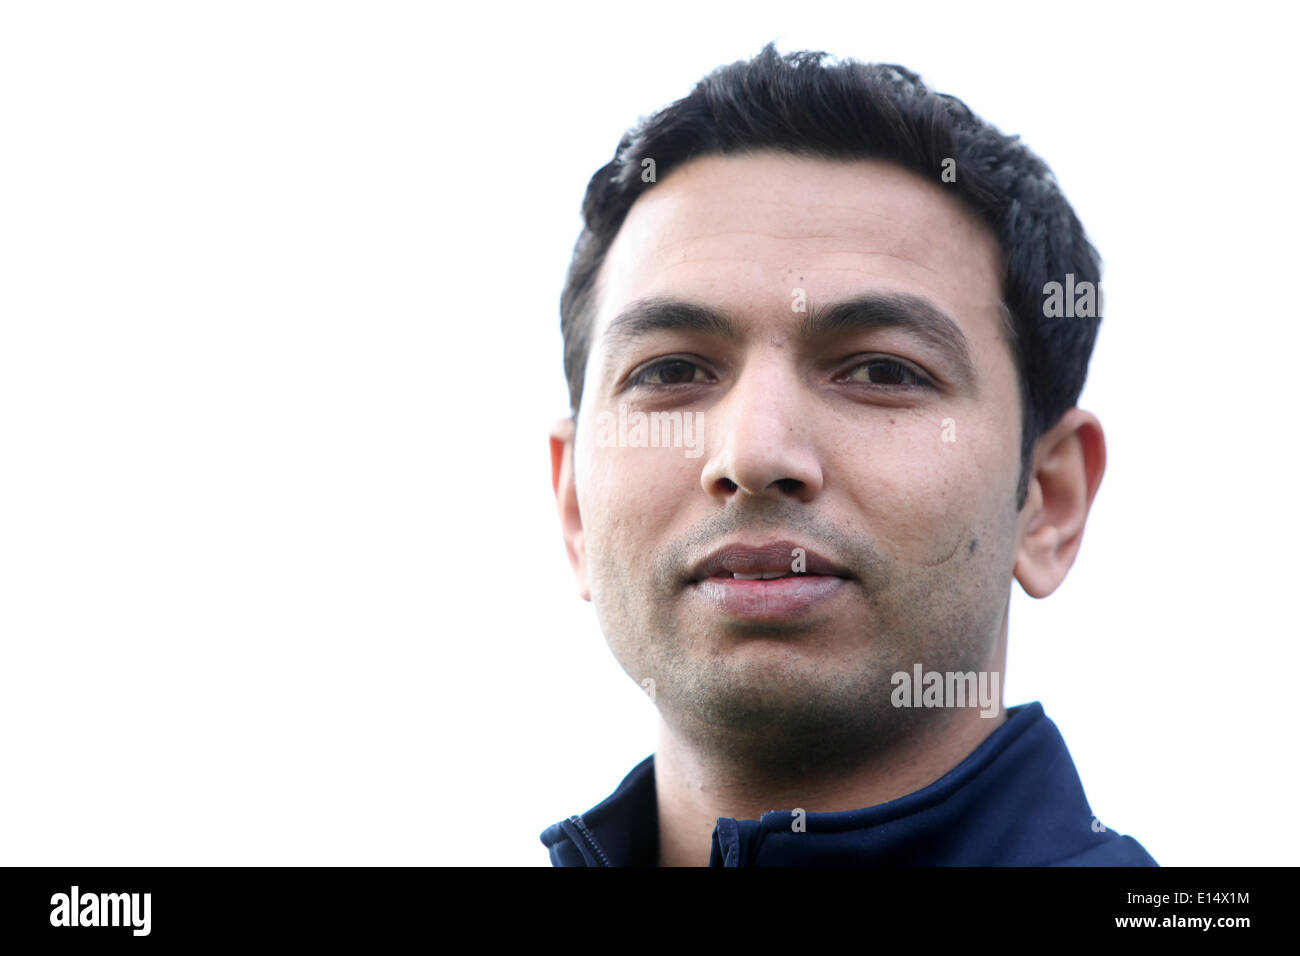 Stock Photo - Sussex County Cricket player Naved Arif Gondal - sussex-county-cricket-player-naved-arif-gondal-E14X1M